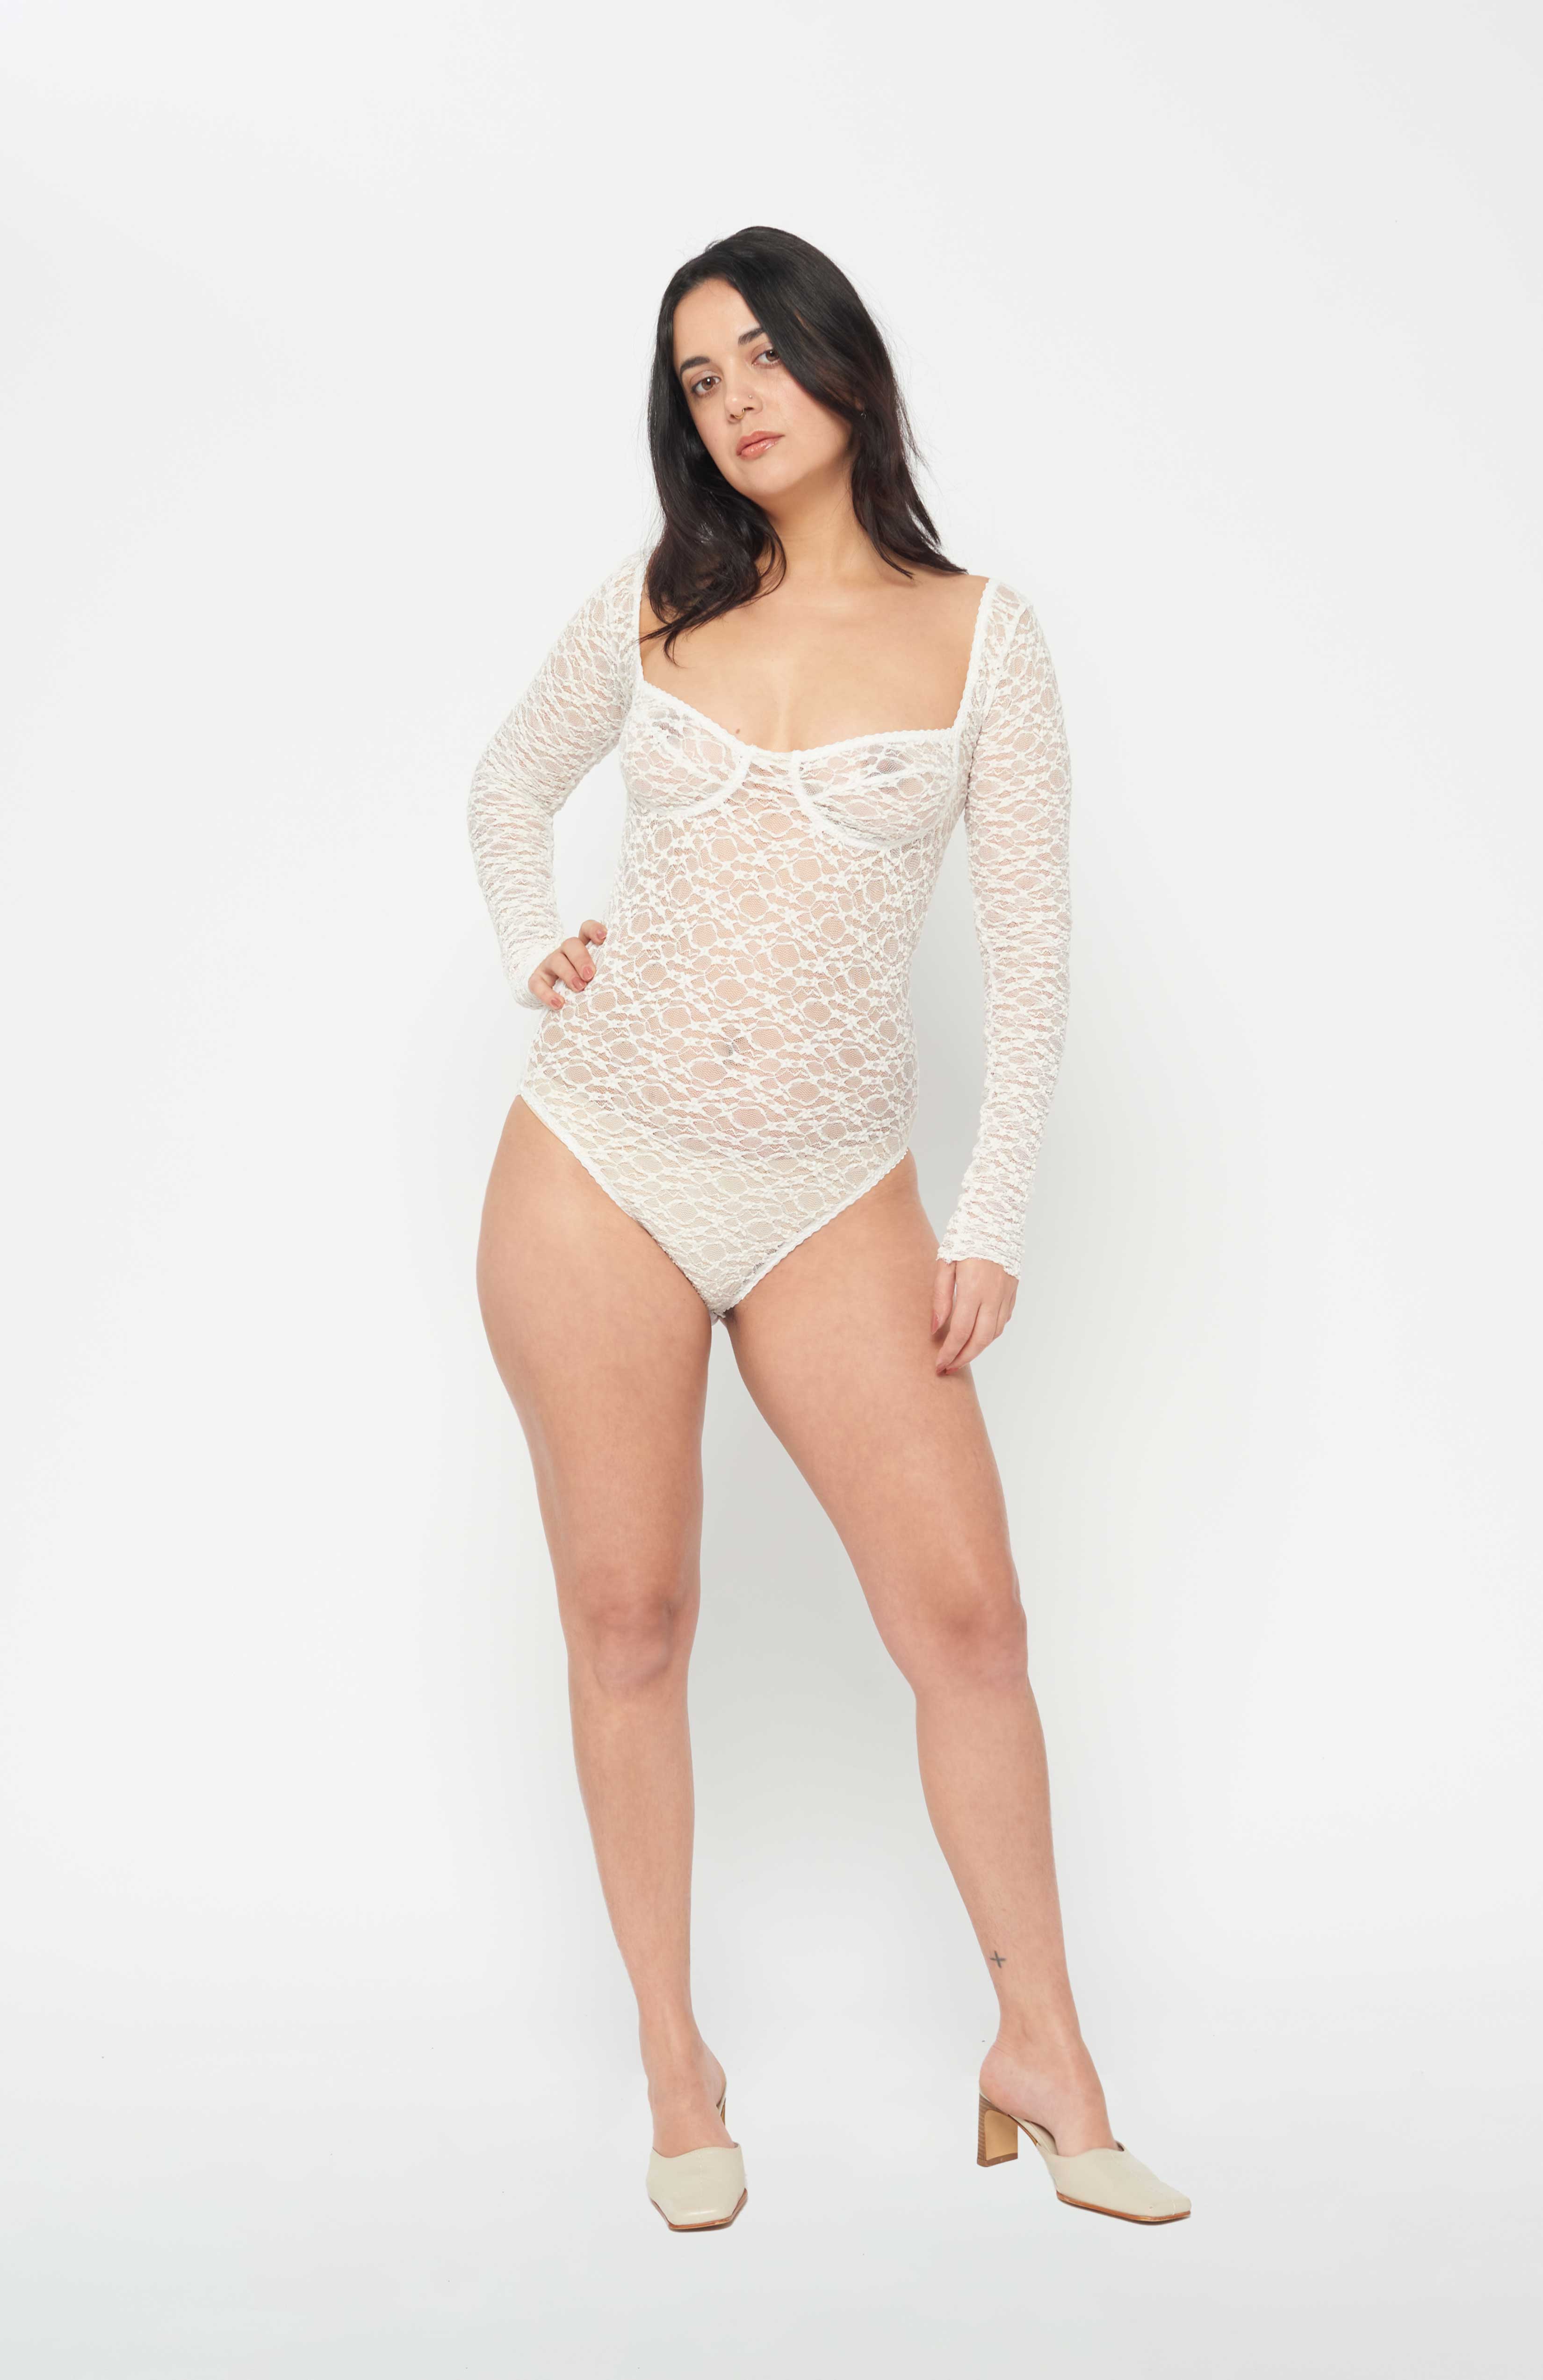 Maroske Peech A reprise of our signature stretch soft cup leotard in stunning ivory lace. Features a snap opening at gusset for ease wearer and zig-zag decorative stitching with a scalloped elastic detail. 